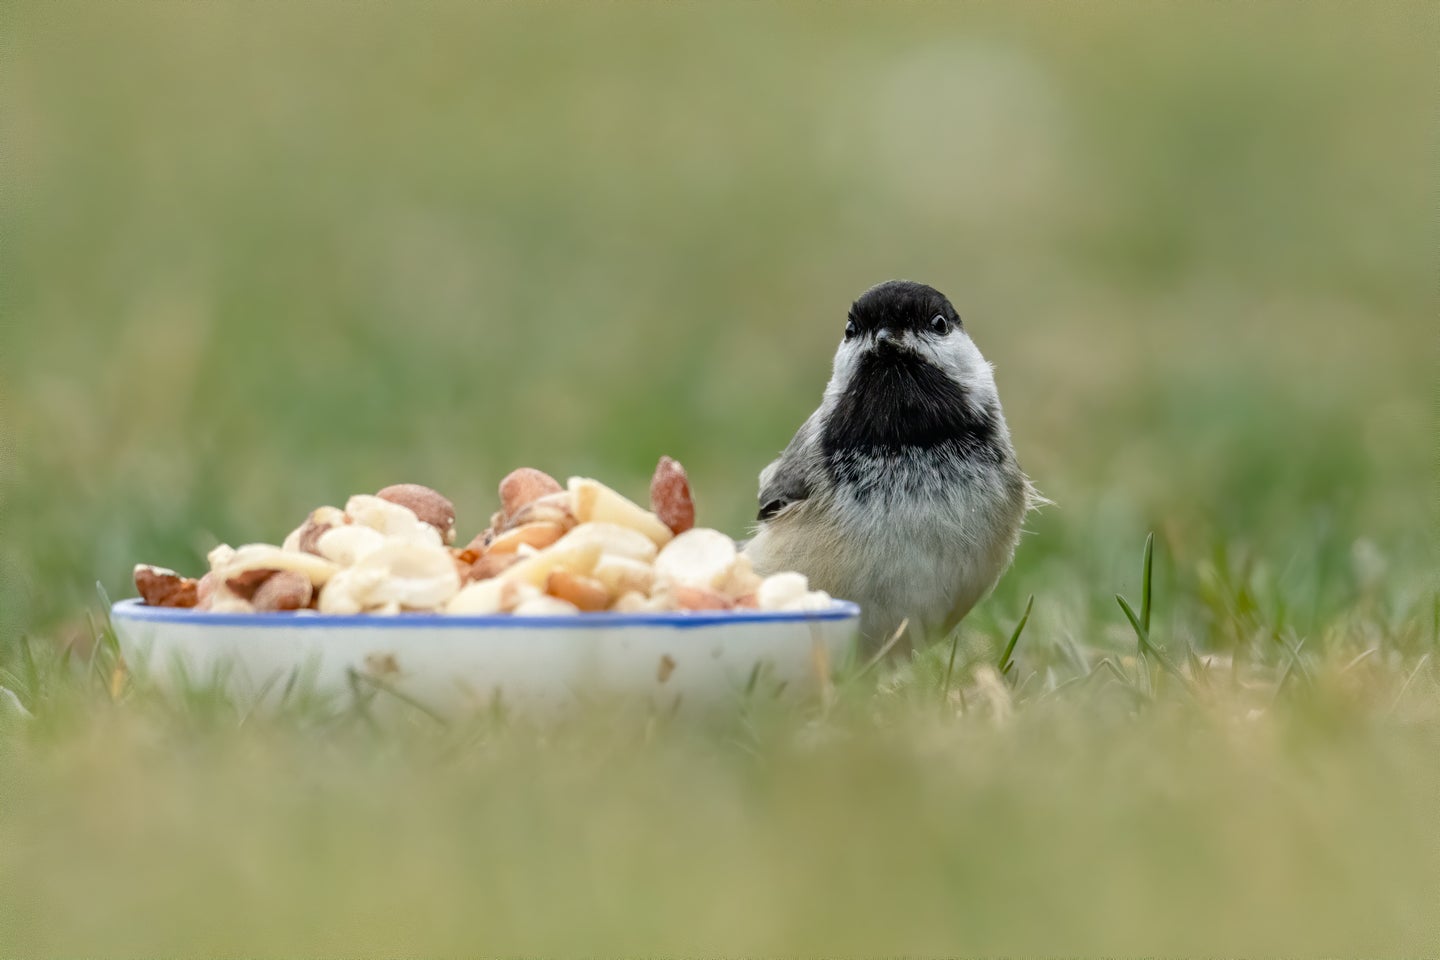 Small bird with bowl of bird food in a field.